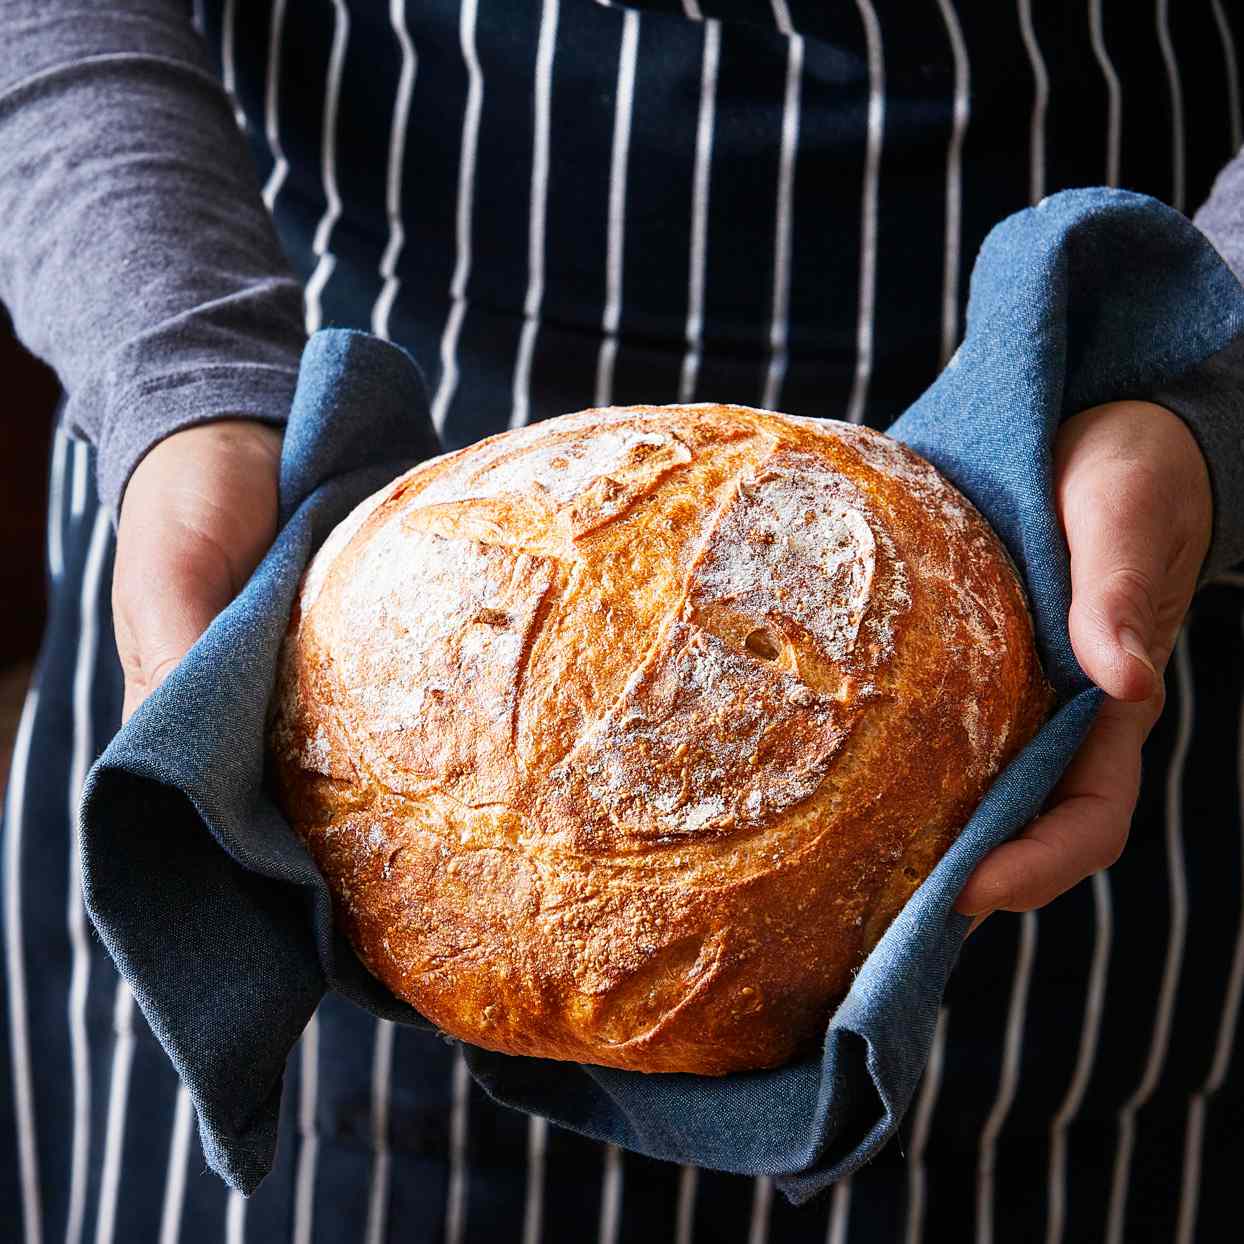 How One Ambitious Kansas Baker Turned Her Bread-Making Hobby into a Home Business